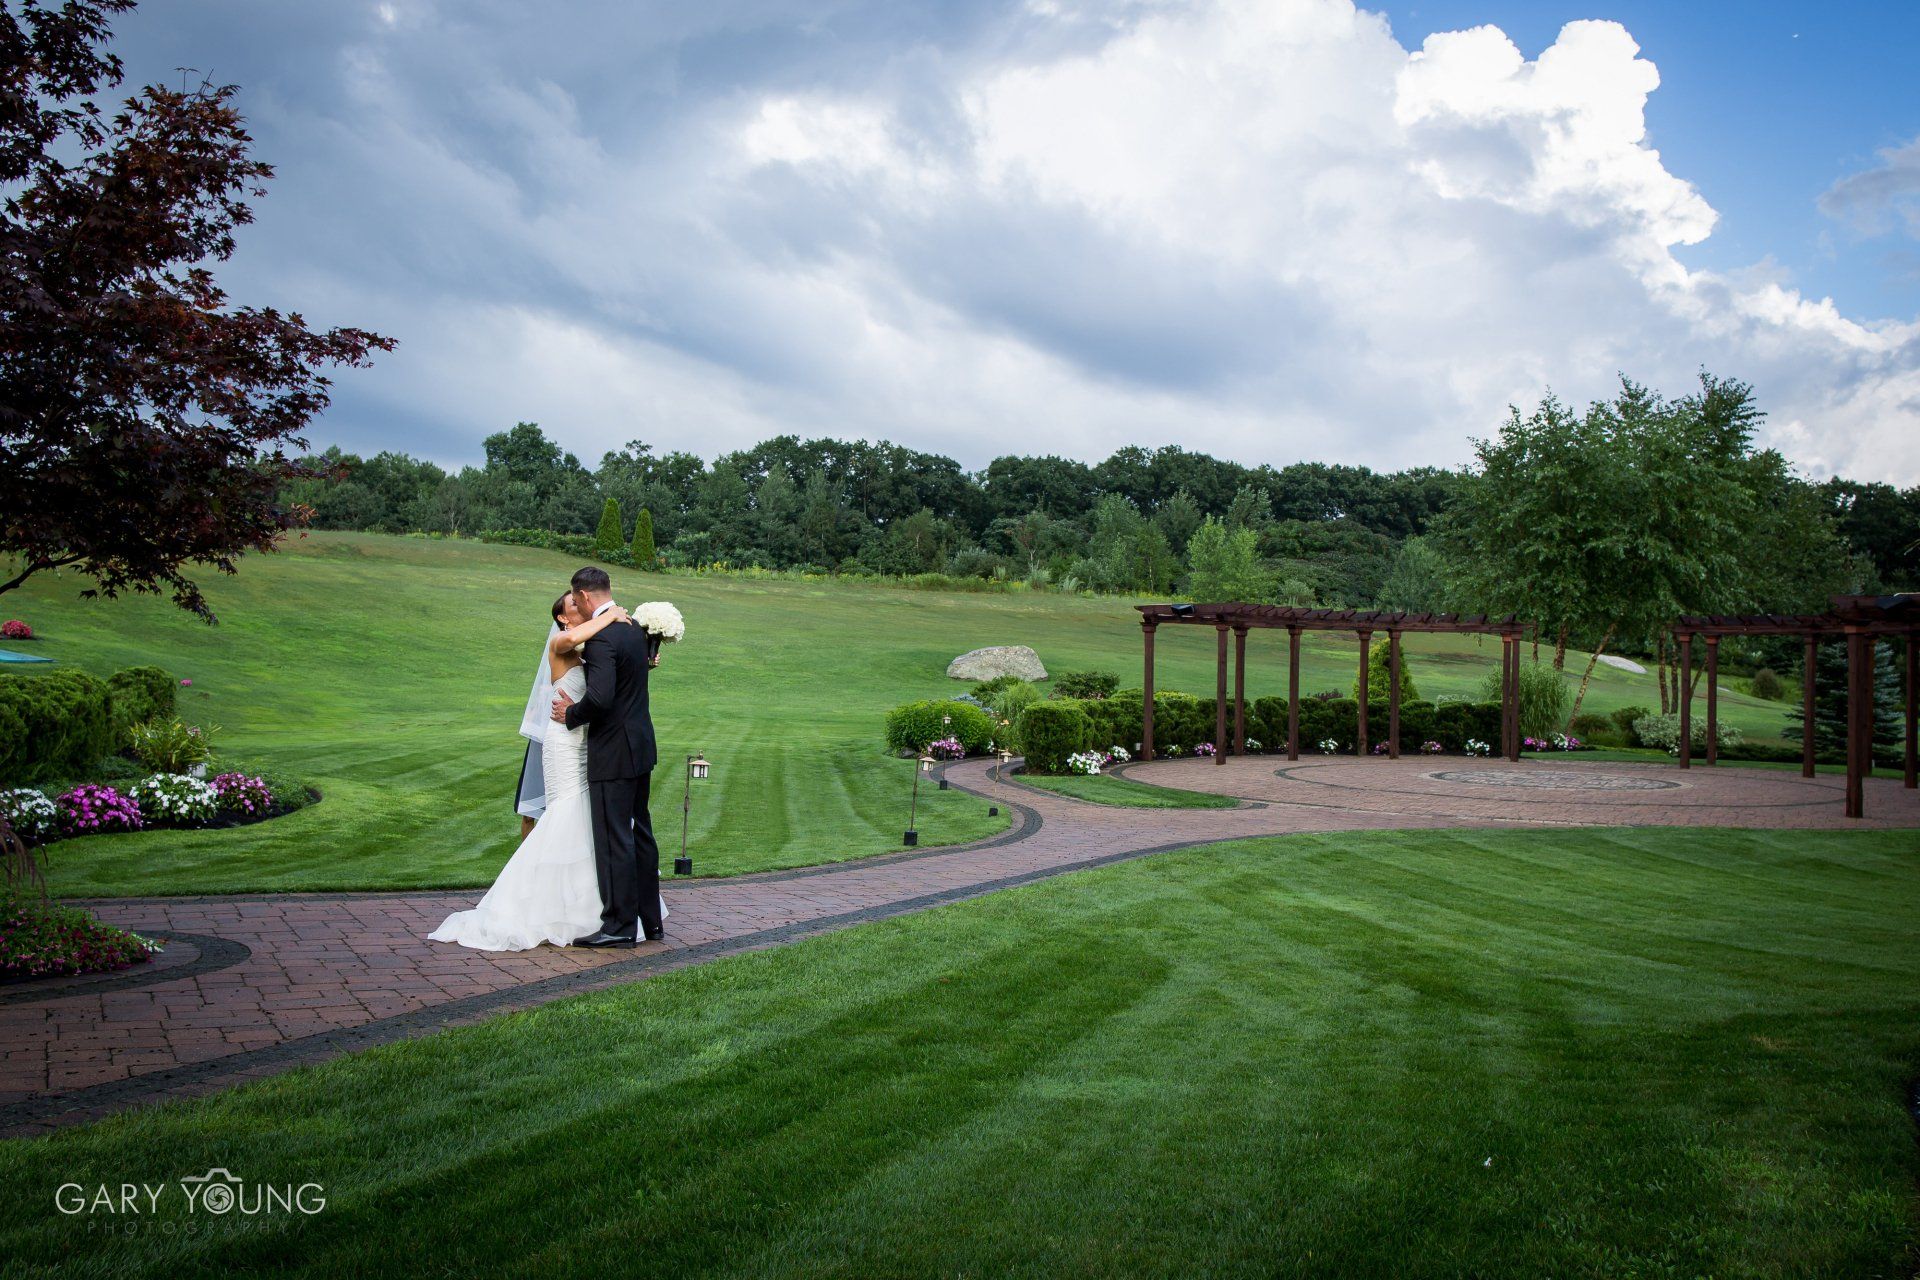 Book a beautiful wedding at Atkinson Resort & Country Club in one of our spacious banquet rooms.